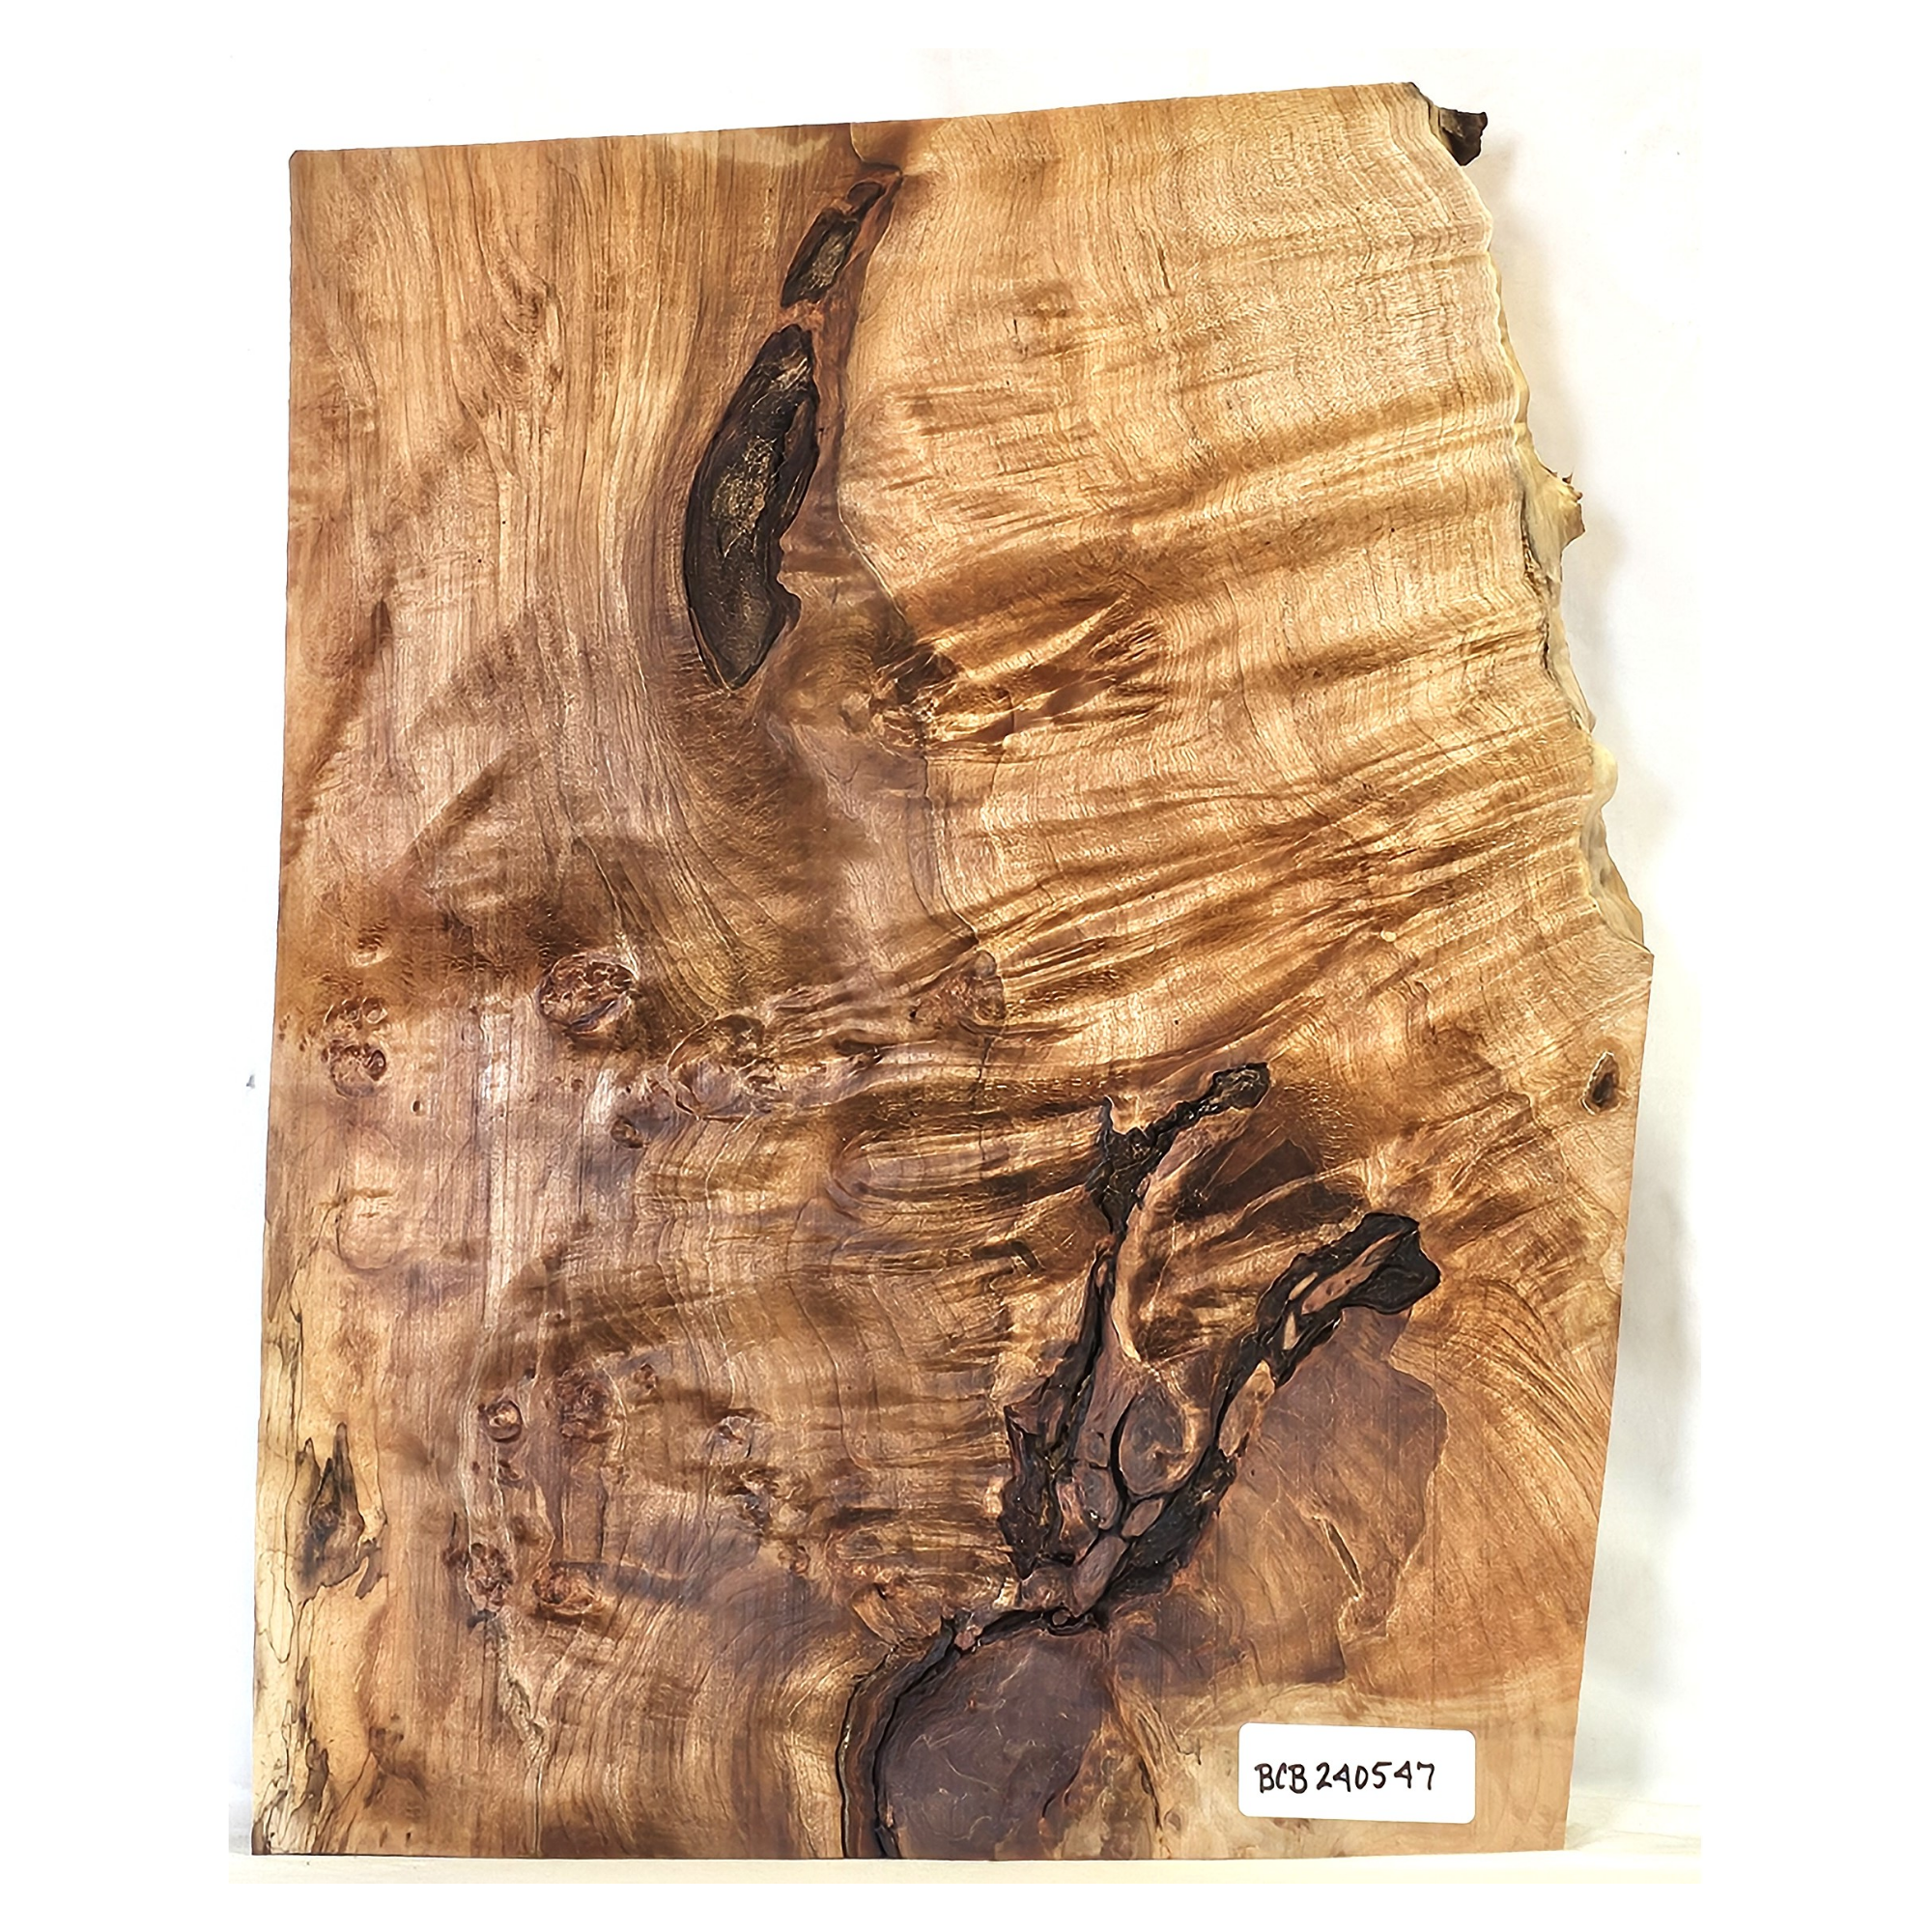 Beautiful curl in this maple burl craft board/billet, along with wonderful color variations and a small bark seam.